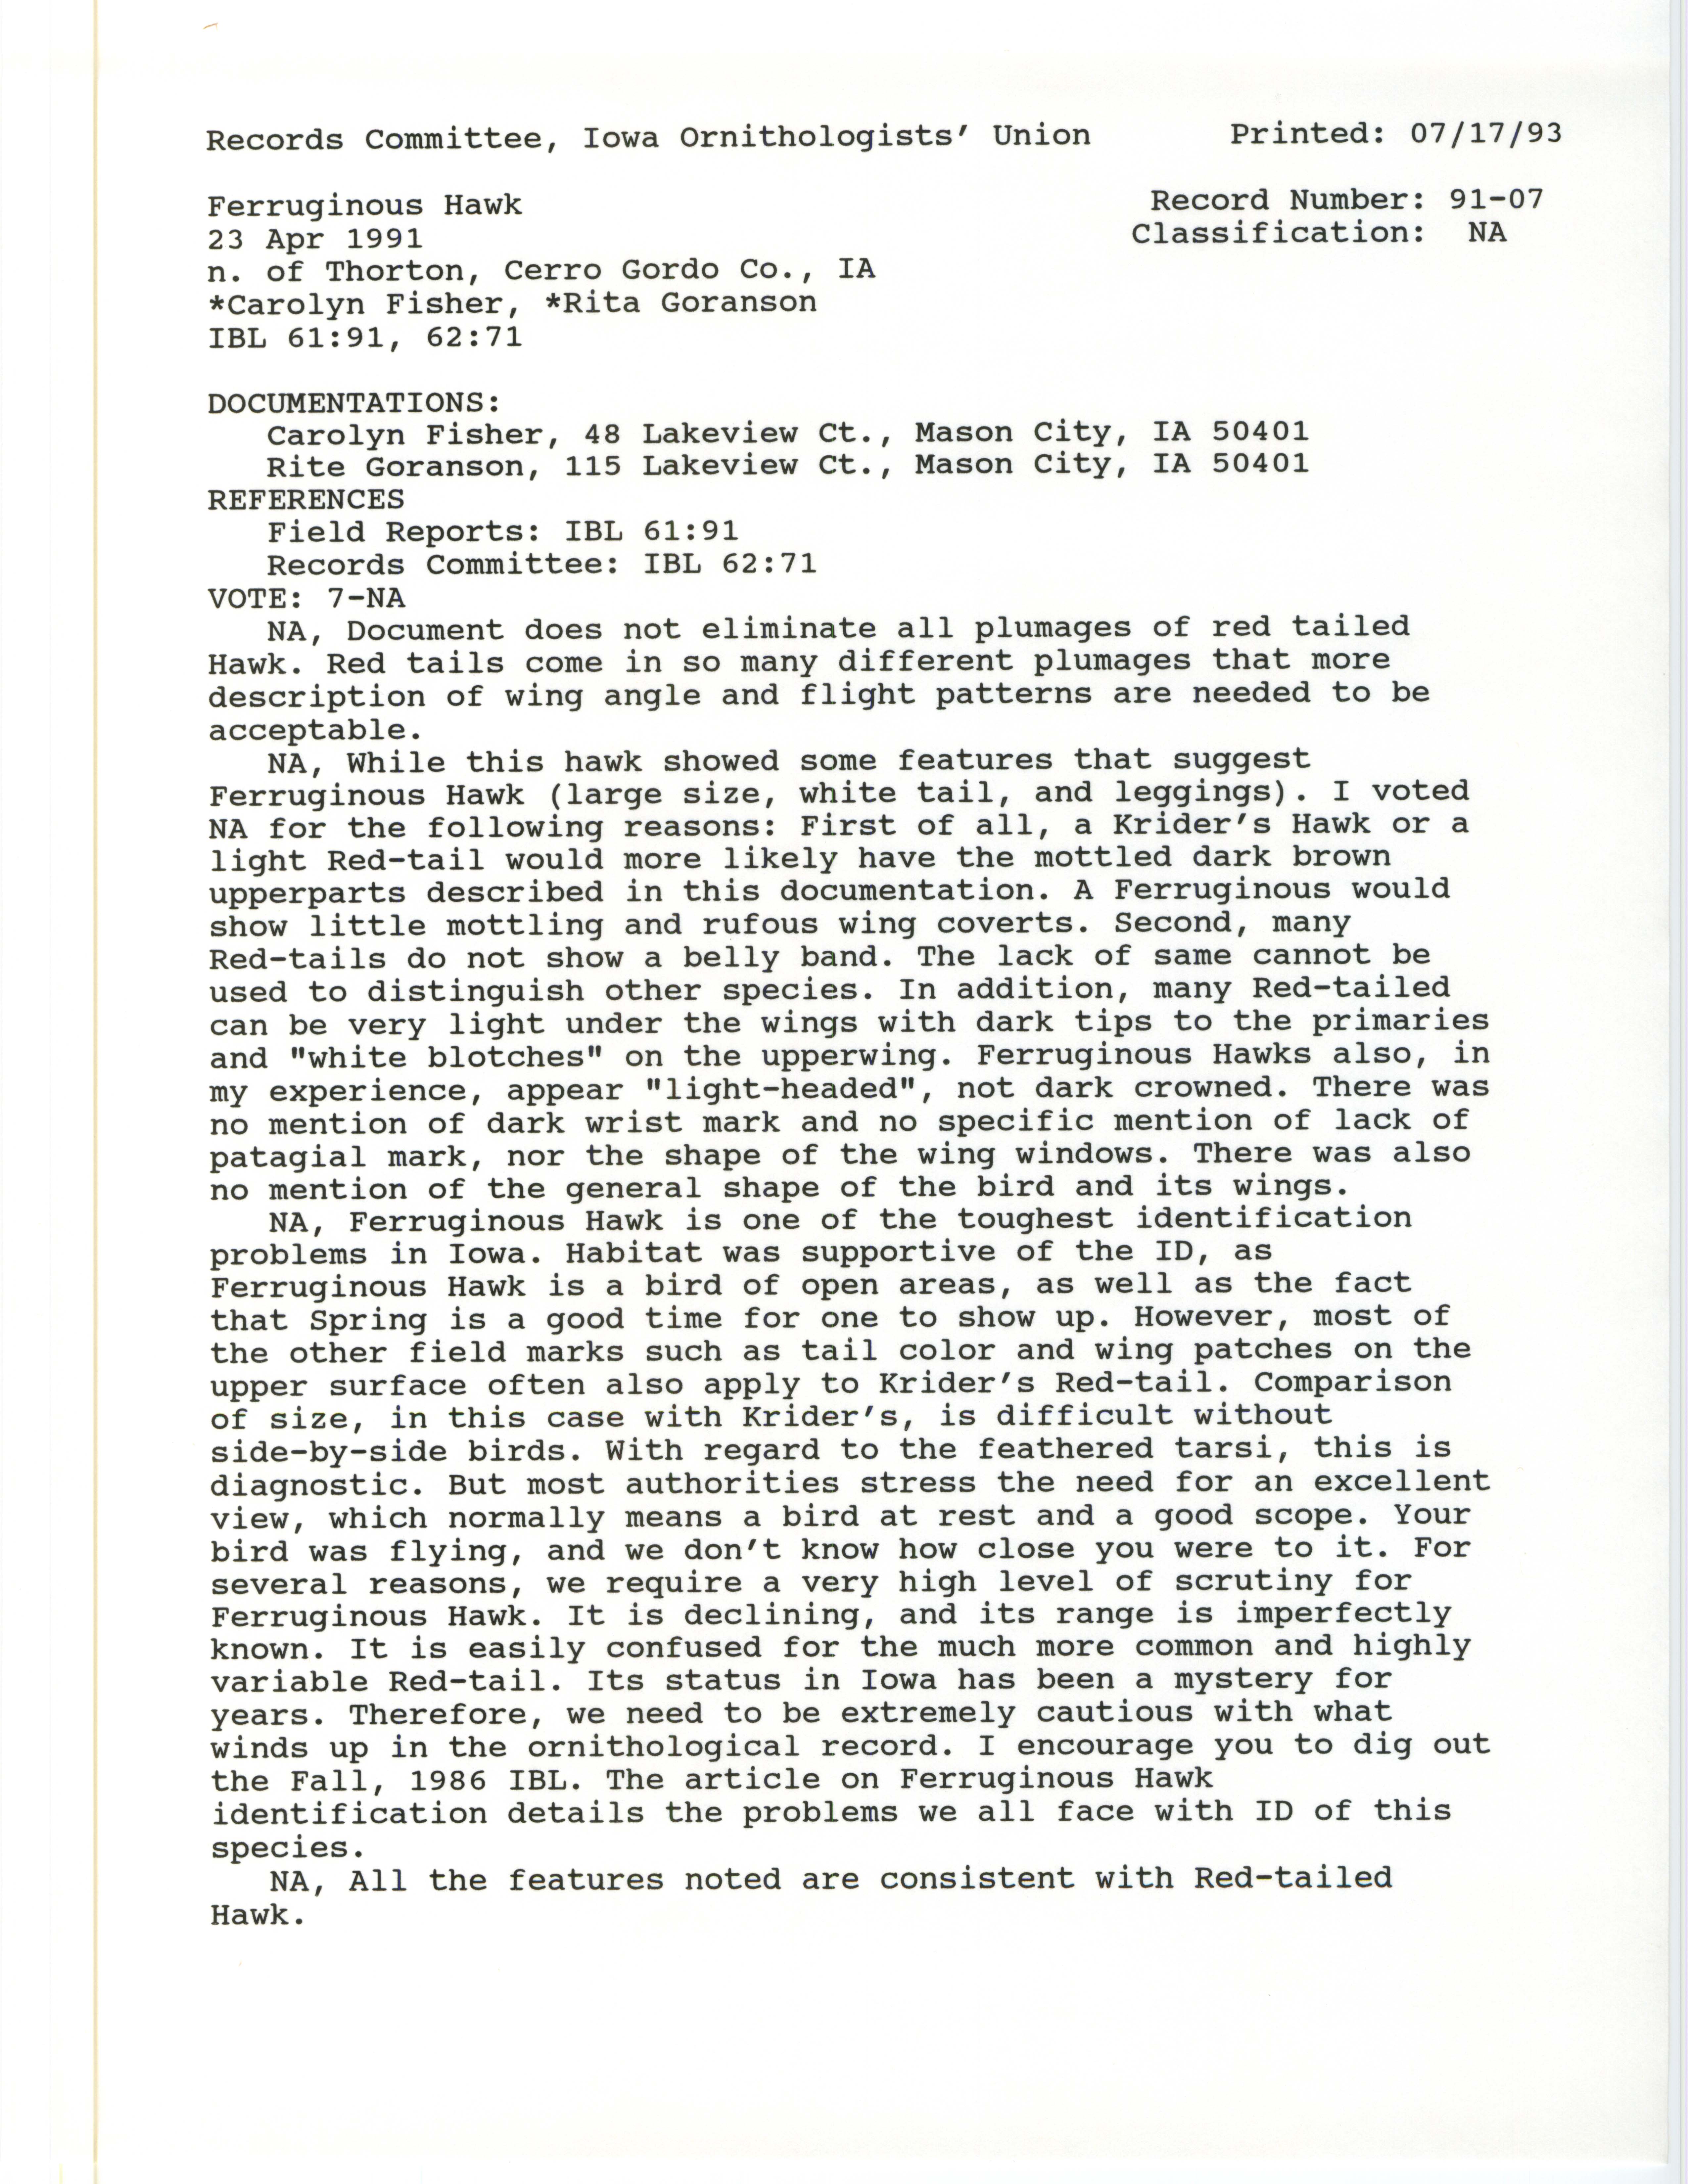 Records Committee review for rare bird sighting of Ferruginous Hawk at Thornton, 1991